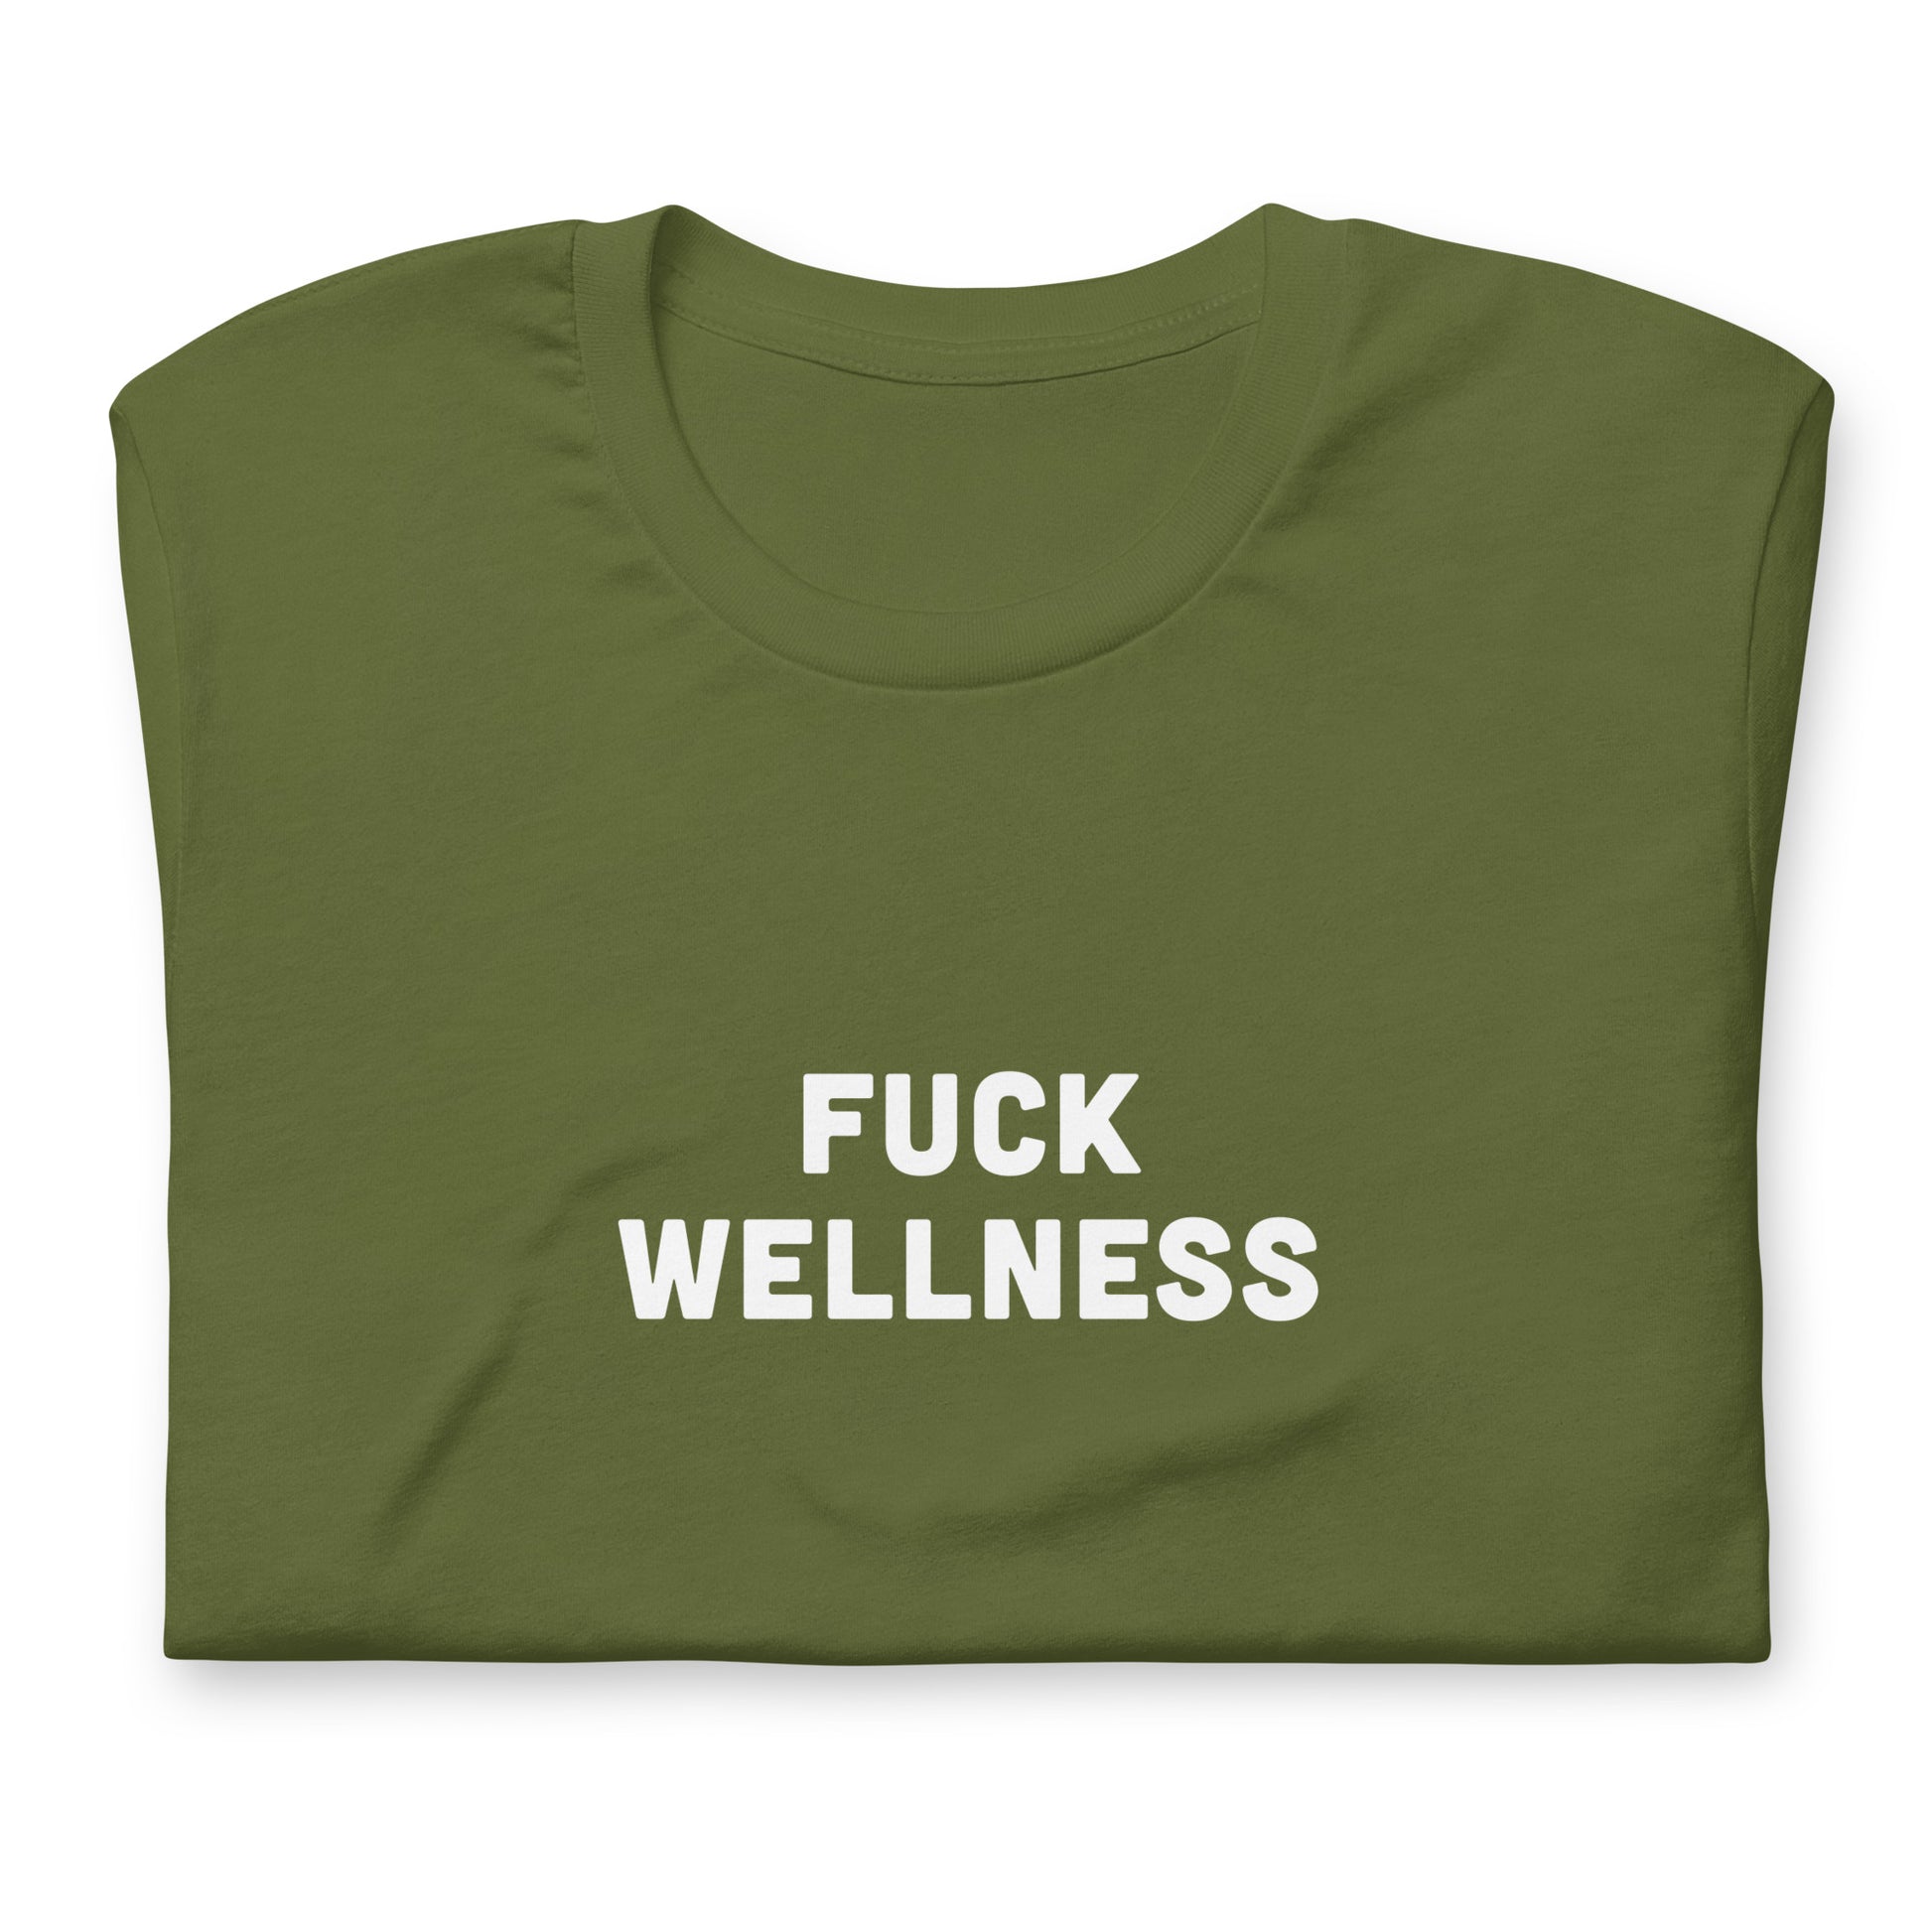 Fuck Wellness T-Shirt Size S Color Navy